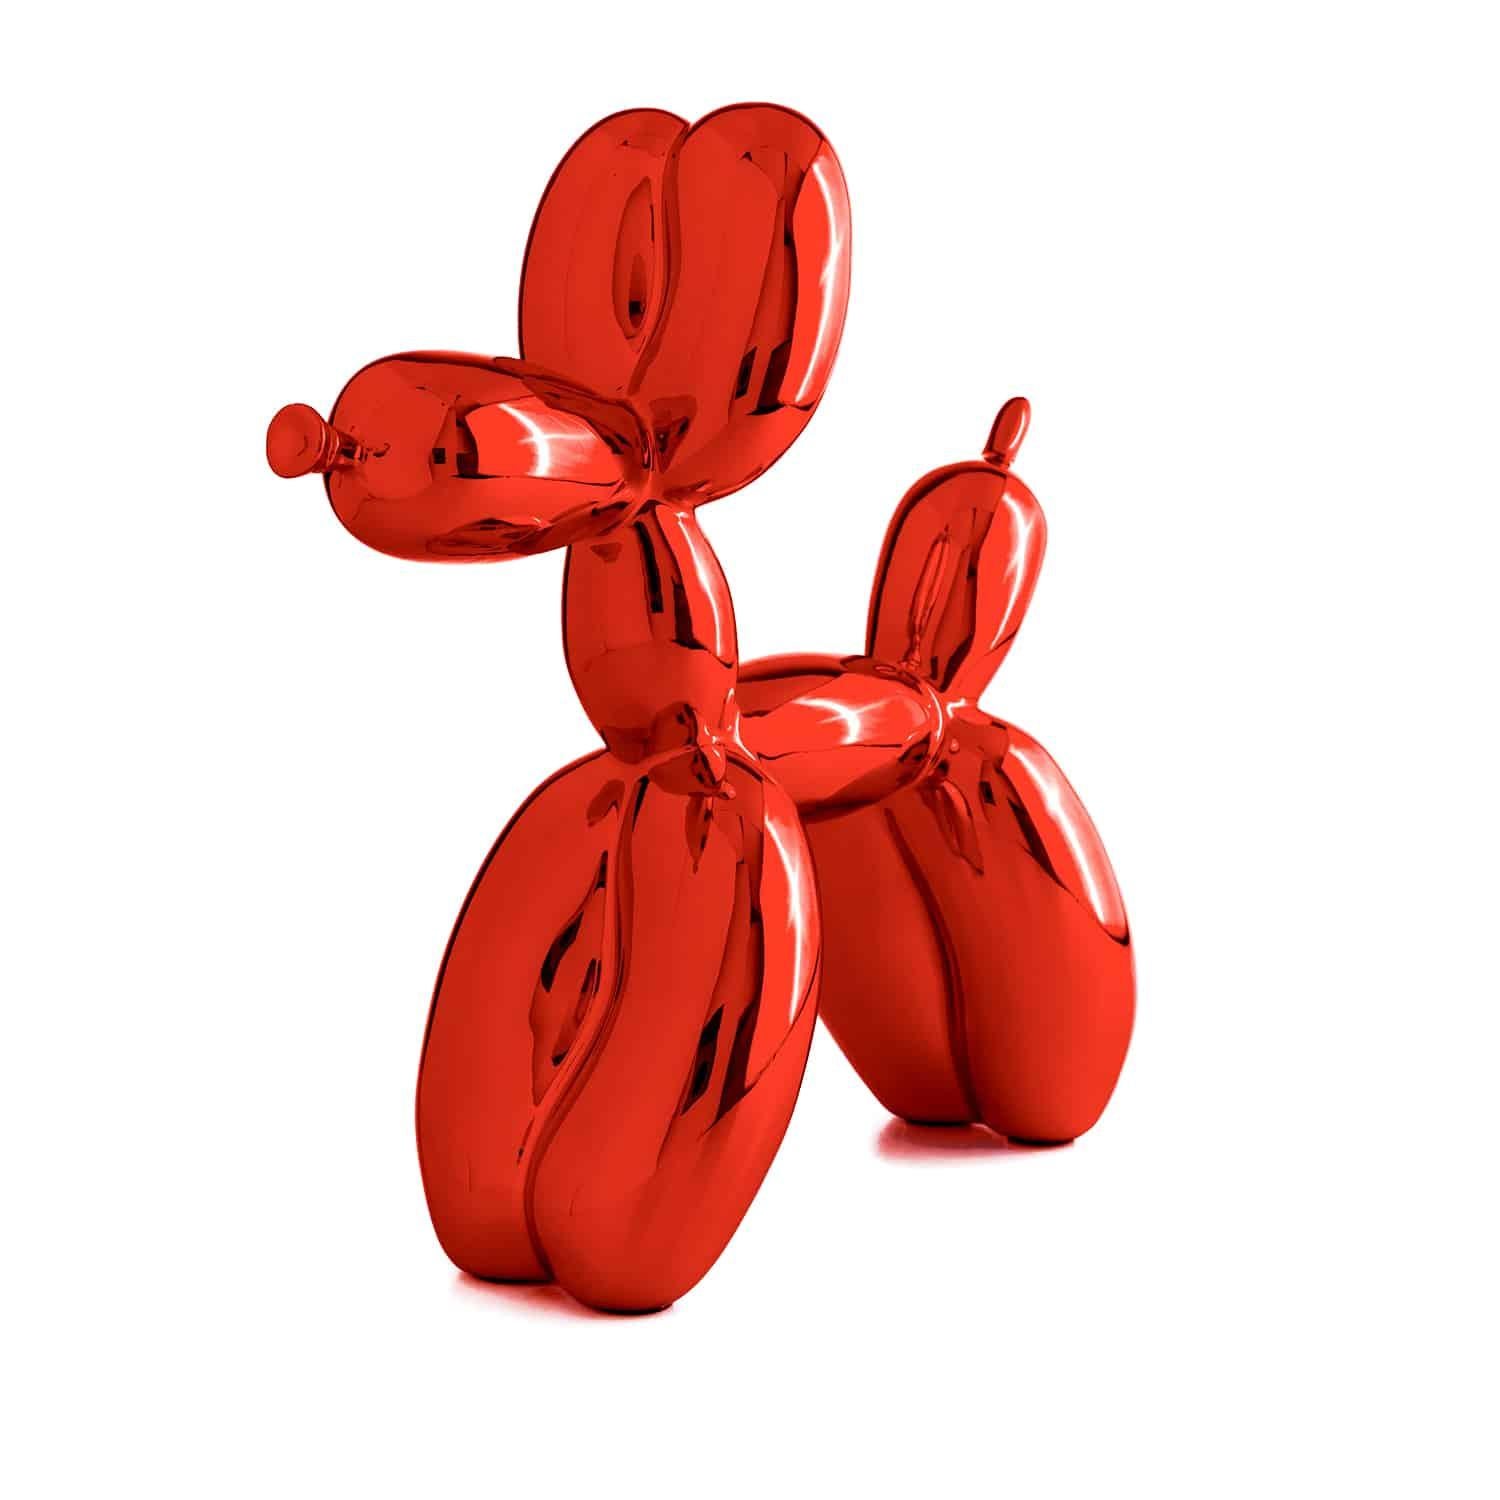 After Jeff Koons Figurative Sculpture - Balloon Dog (After) -  Red